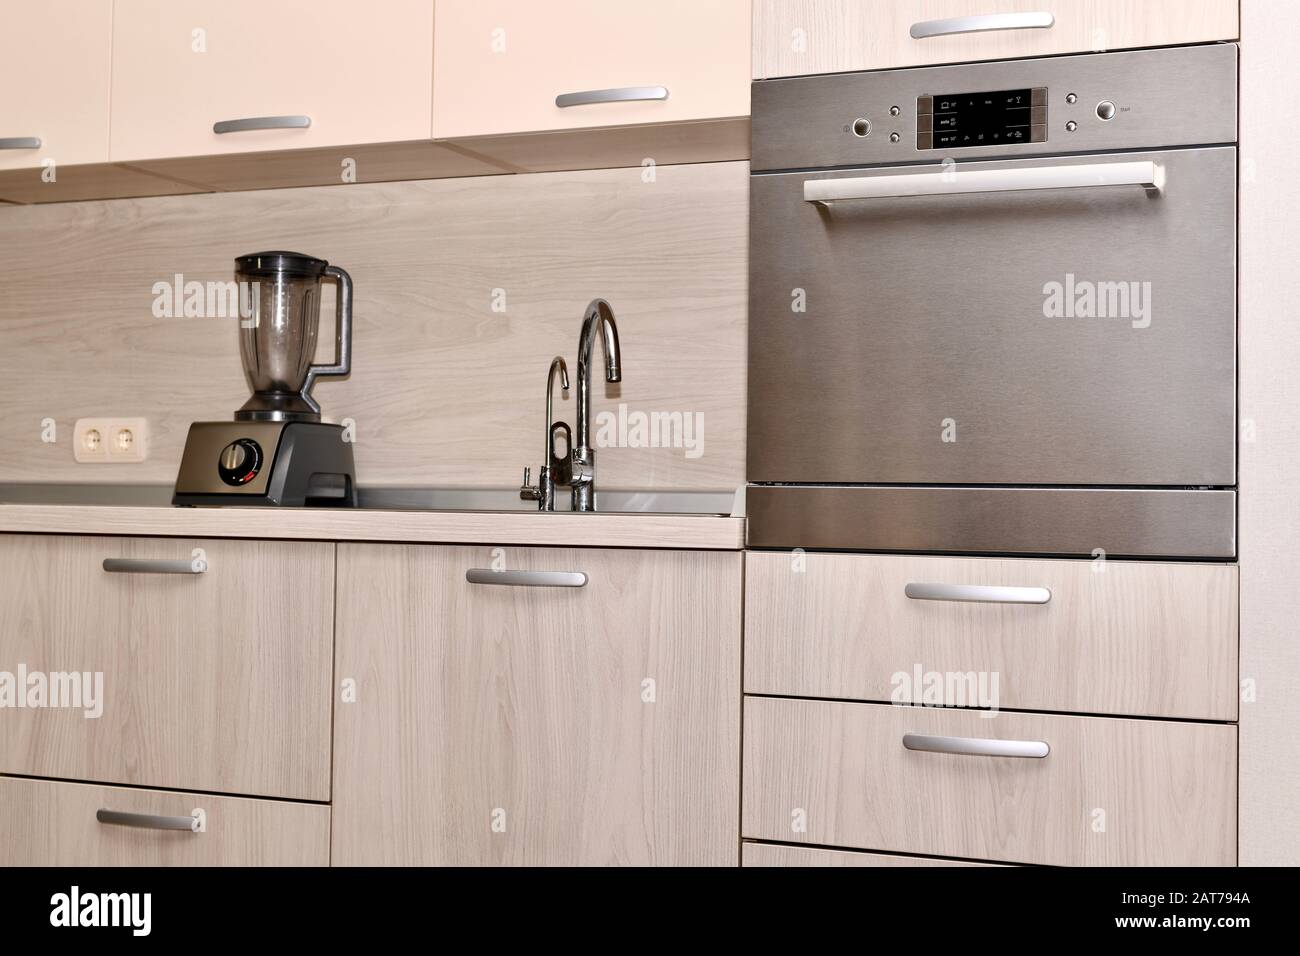 A fragment of kitchen furniture with a dishwasher, conveniently installed at the level of the hostess's belt. Stock Photo